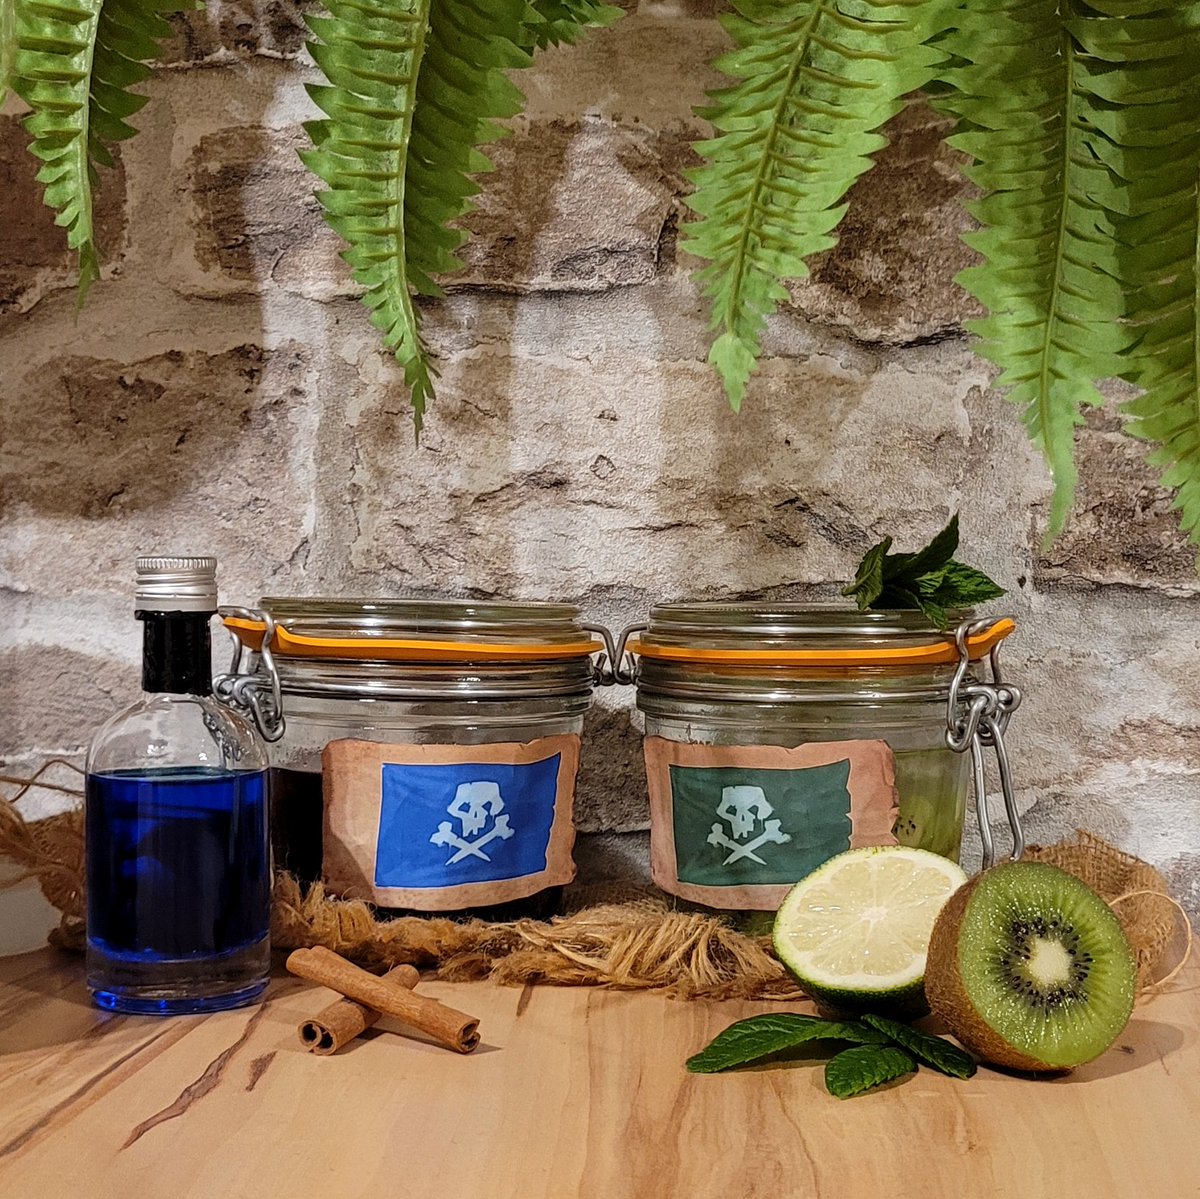 In order to #BeMorePirate with the @SeaOfThieves launch on a second console, I made some new arranged rum recipes inspired by both @PlayStation and @Xbox colours! So here we have: 🔵 Blueberry, curaçao and cinnamon. 🟢 Lime, kiwi and mint. And happy Season 12 to y'all! 🍻